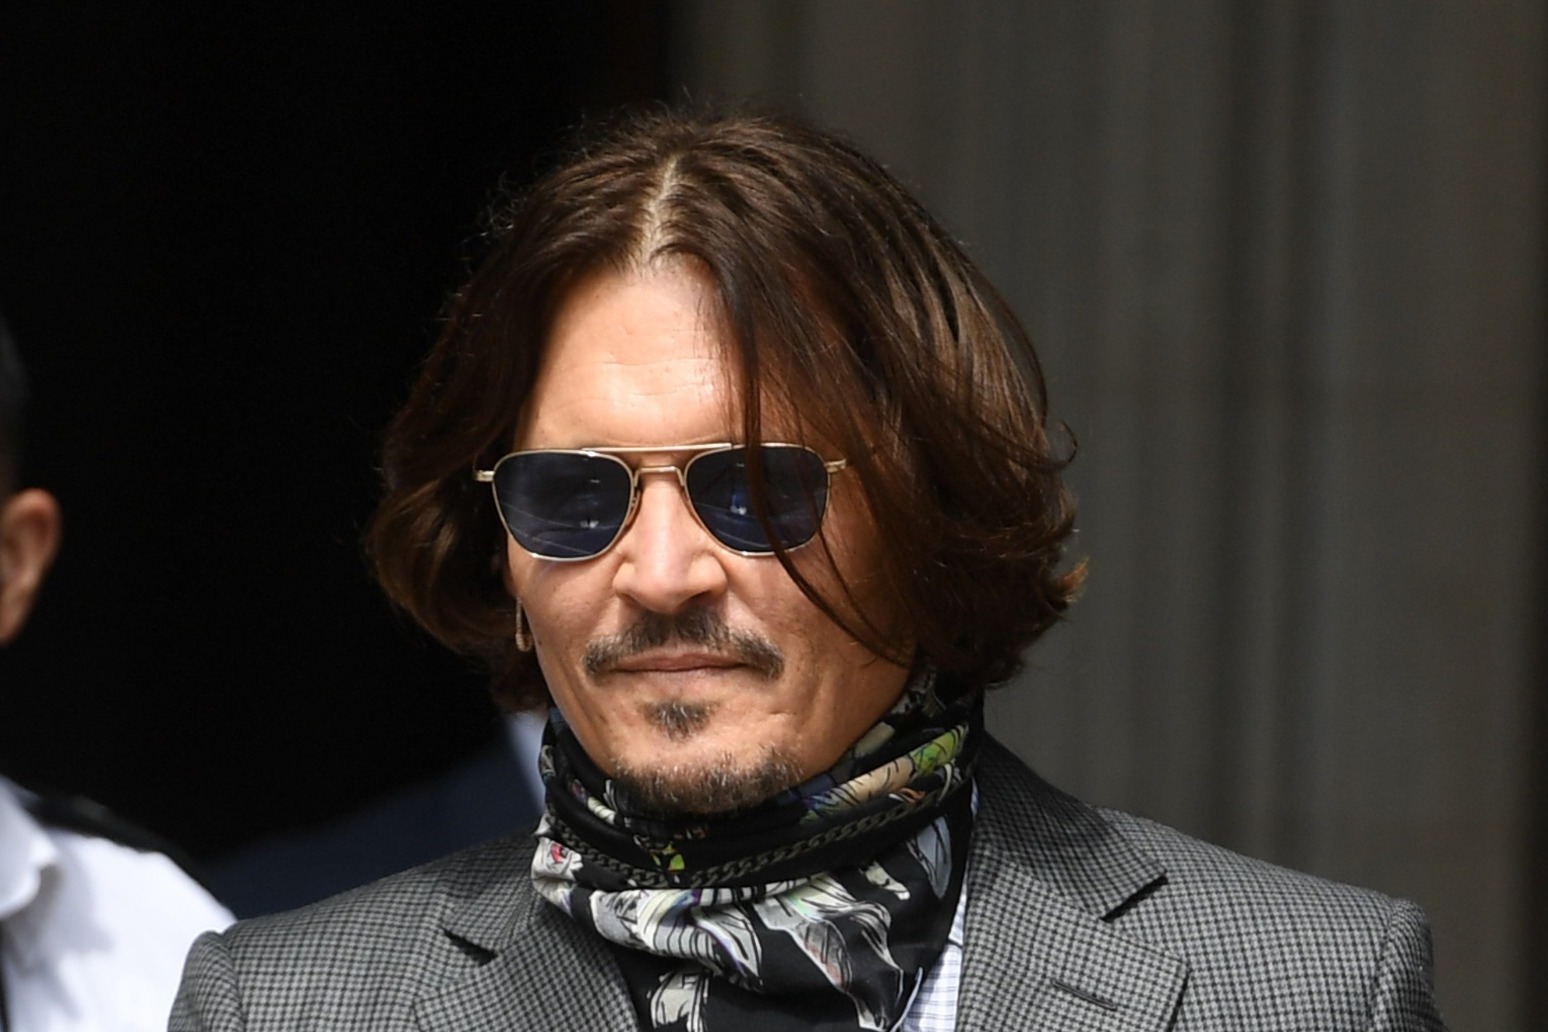 Johnny Depp I am a southern gentleman as violent text messages shown in court